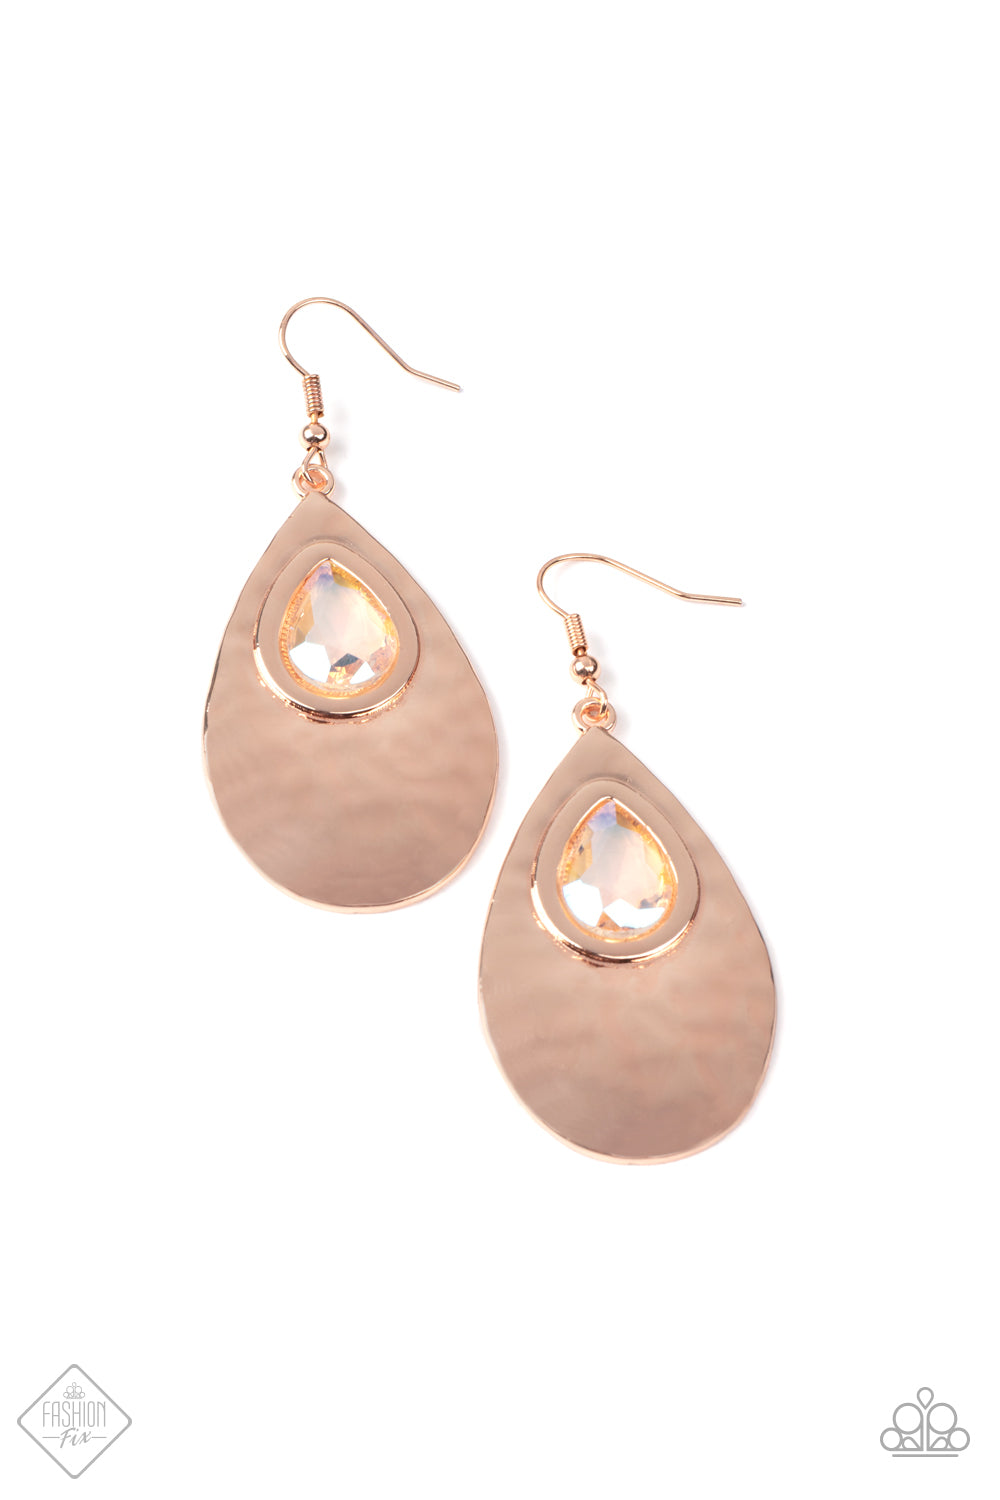 Tranquil Trove - Rose Gold earring 1719